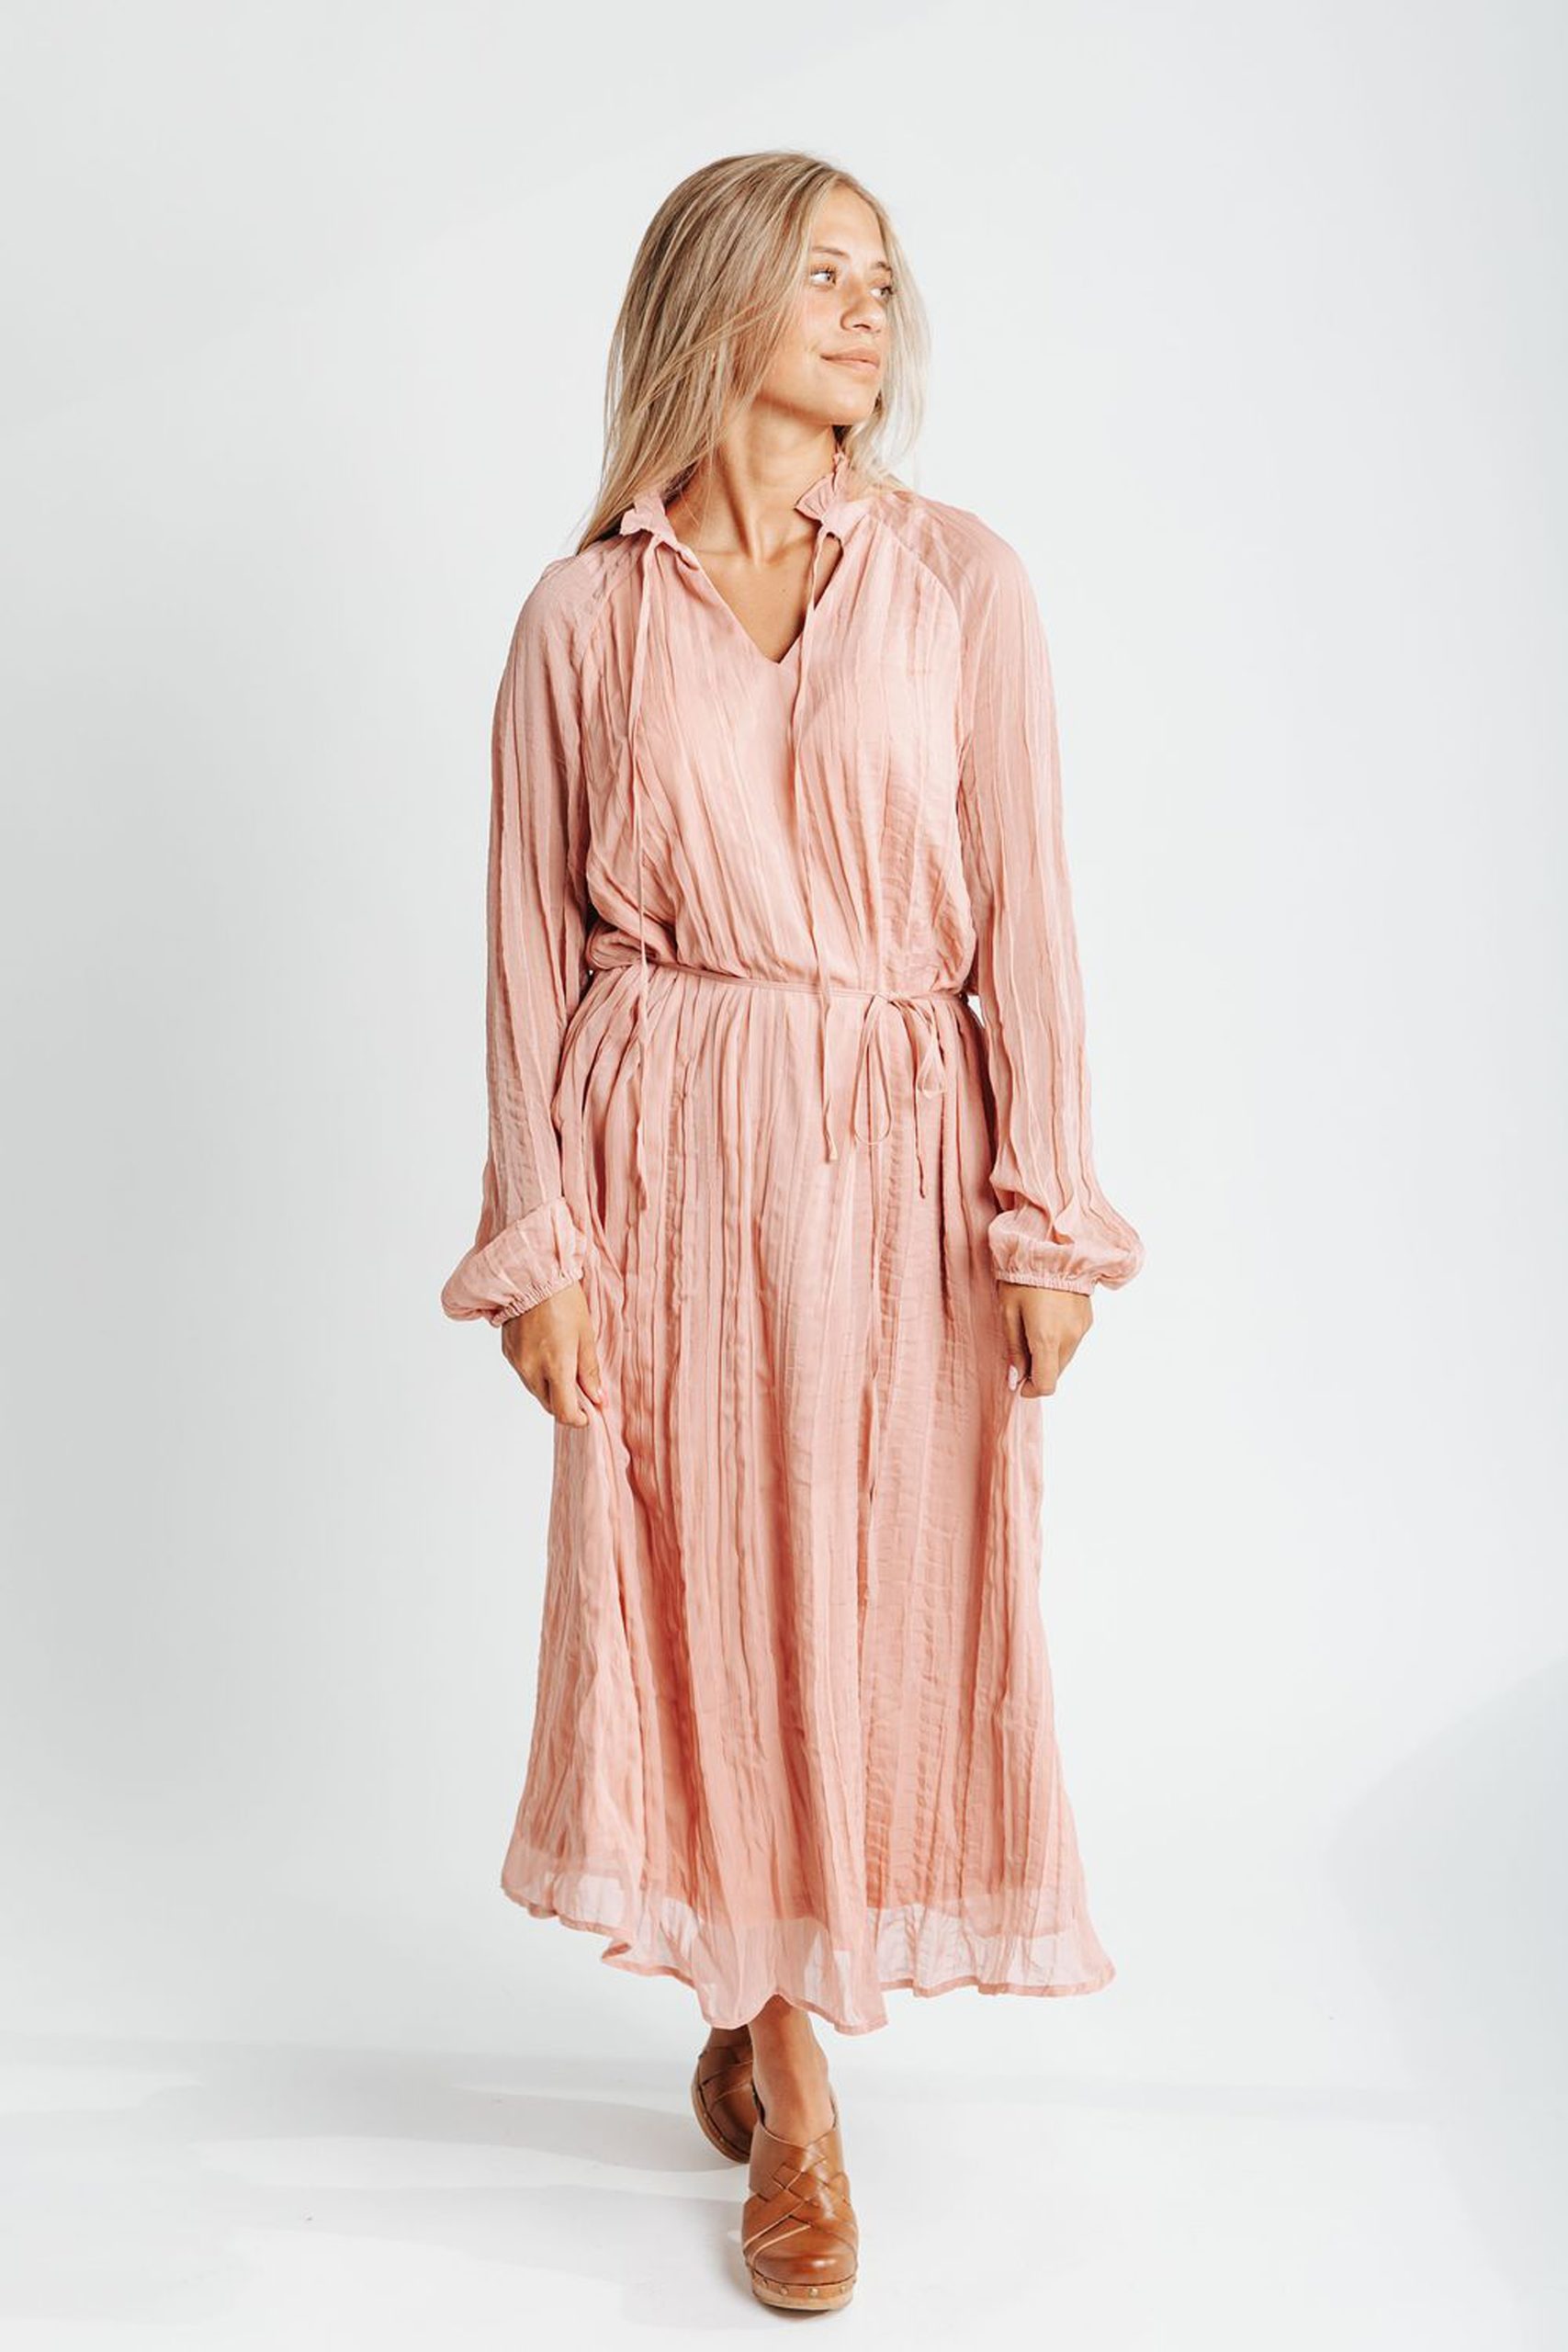  Fall dresses under $100 | The Ridge Crinkle Dress in Dusty Rose from Piper + Scoot